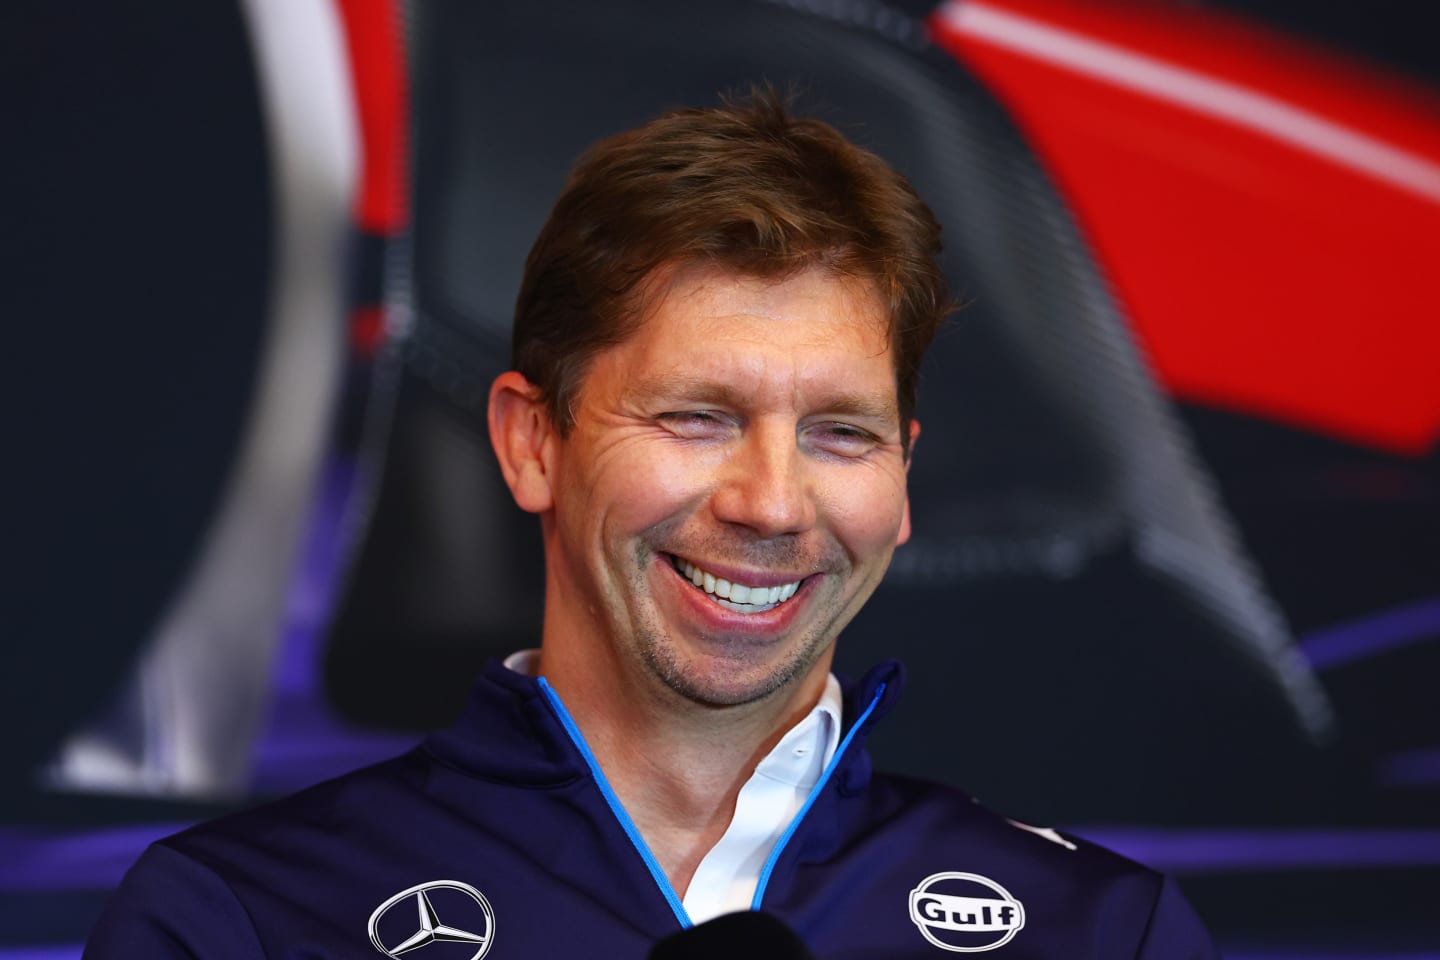 MONTREAL, QUEBEC - JUNE 07: James Vowles, Team Principal of Williams attends the Team Principals Press Conference during practice ahead of the F1 Grand Prix of Canada at Circuit Gilles Villeneuve on June 07, 2024 in Montreal, Quebec. (Photo by Bryn Lennon/Getty Images)